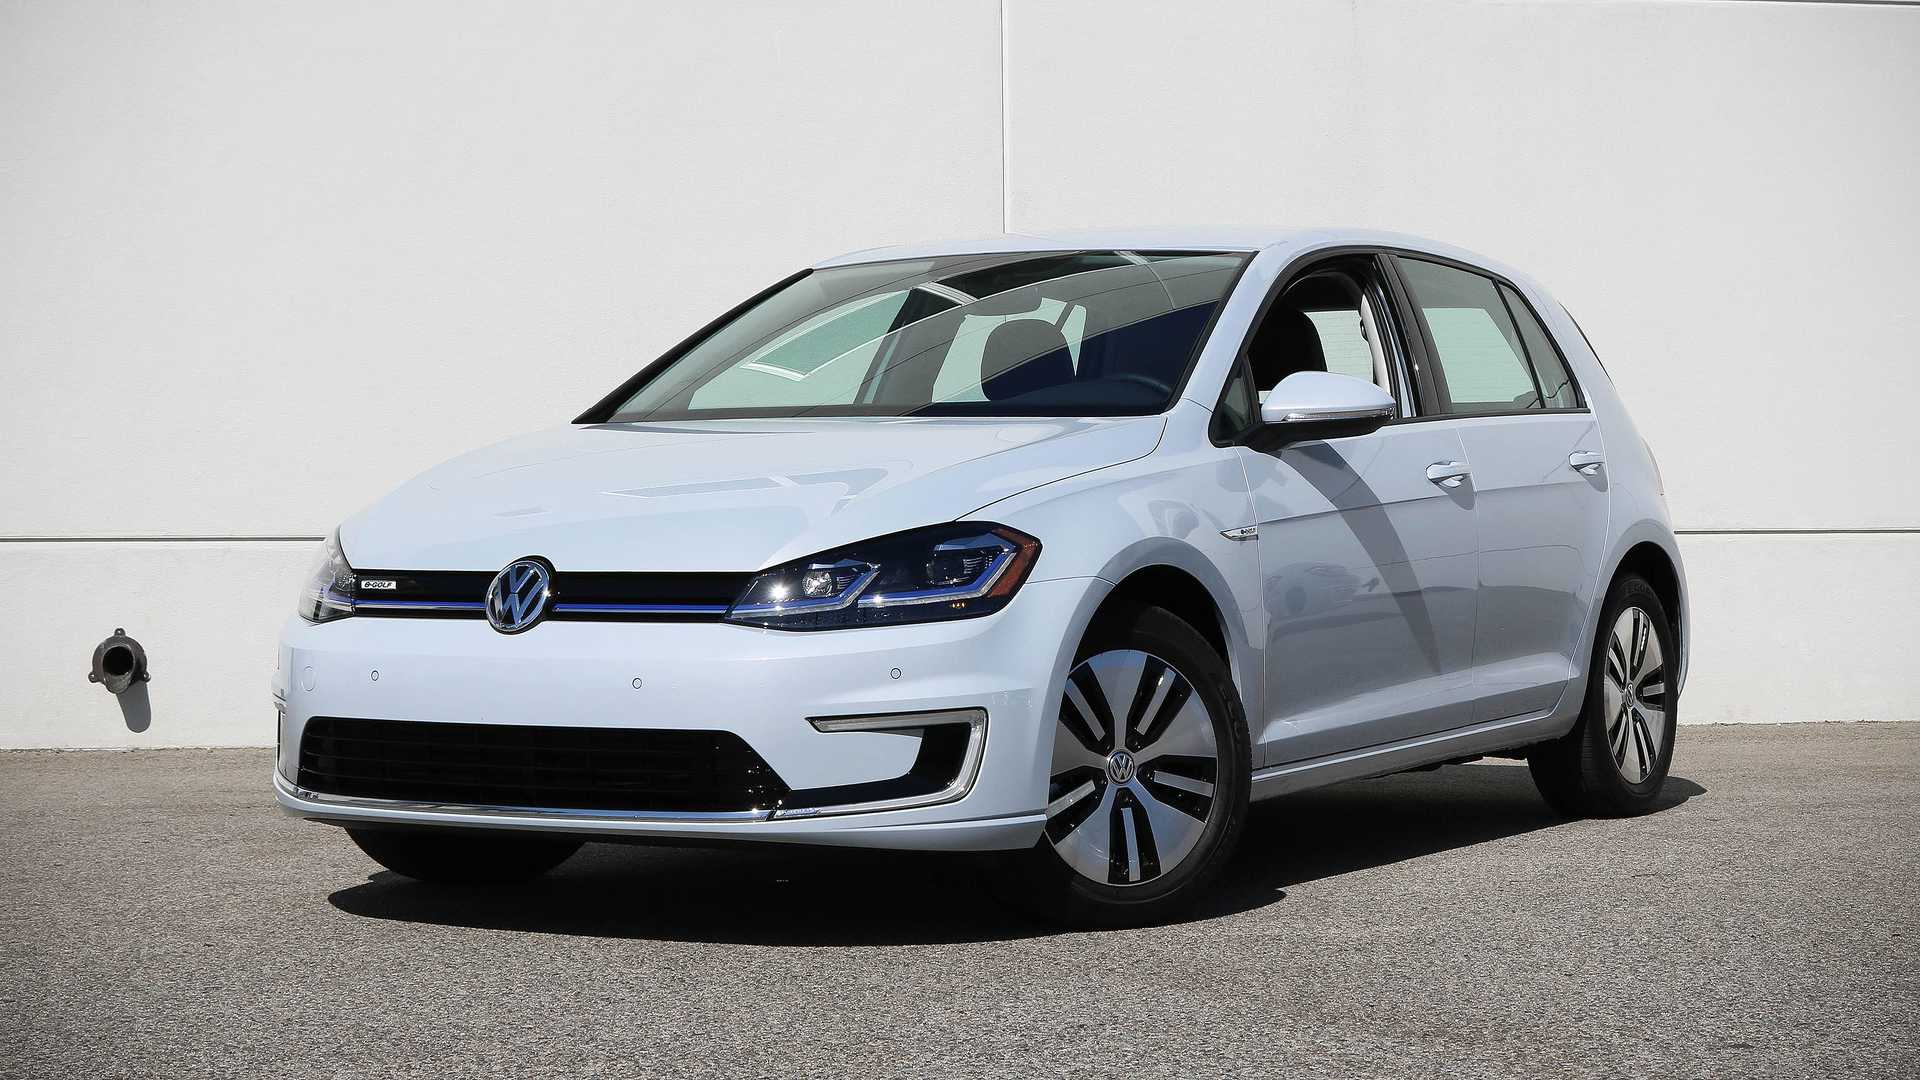 2017 Volkswagen e-Golf Review: Getting There